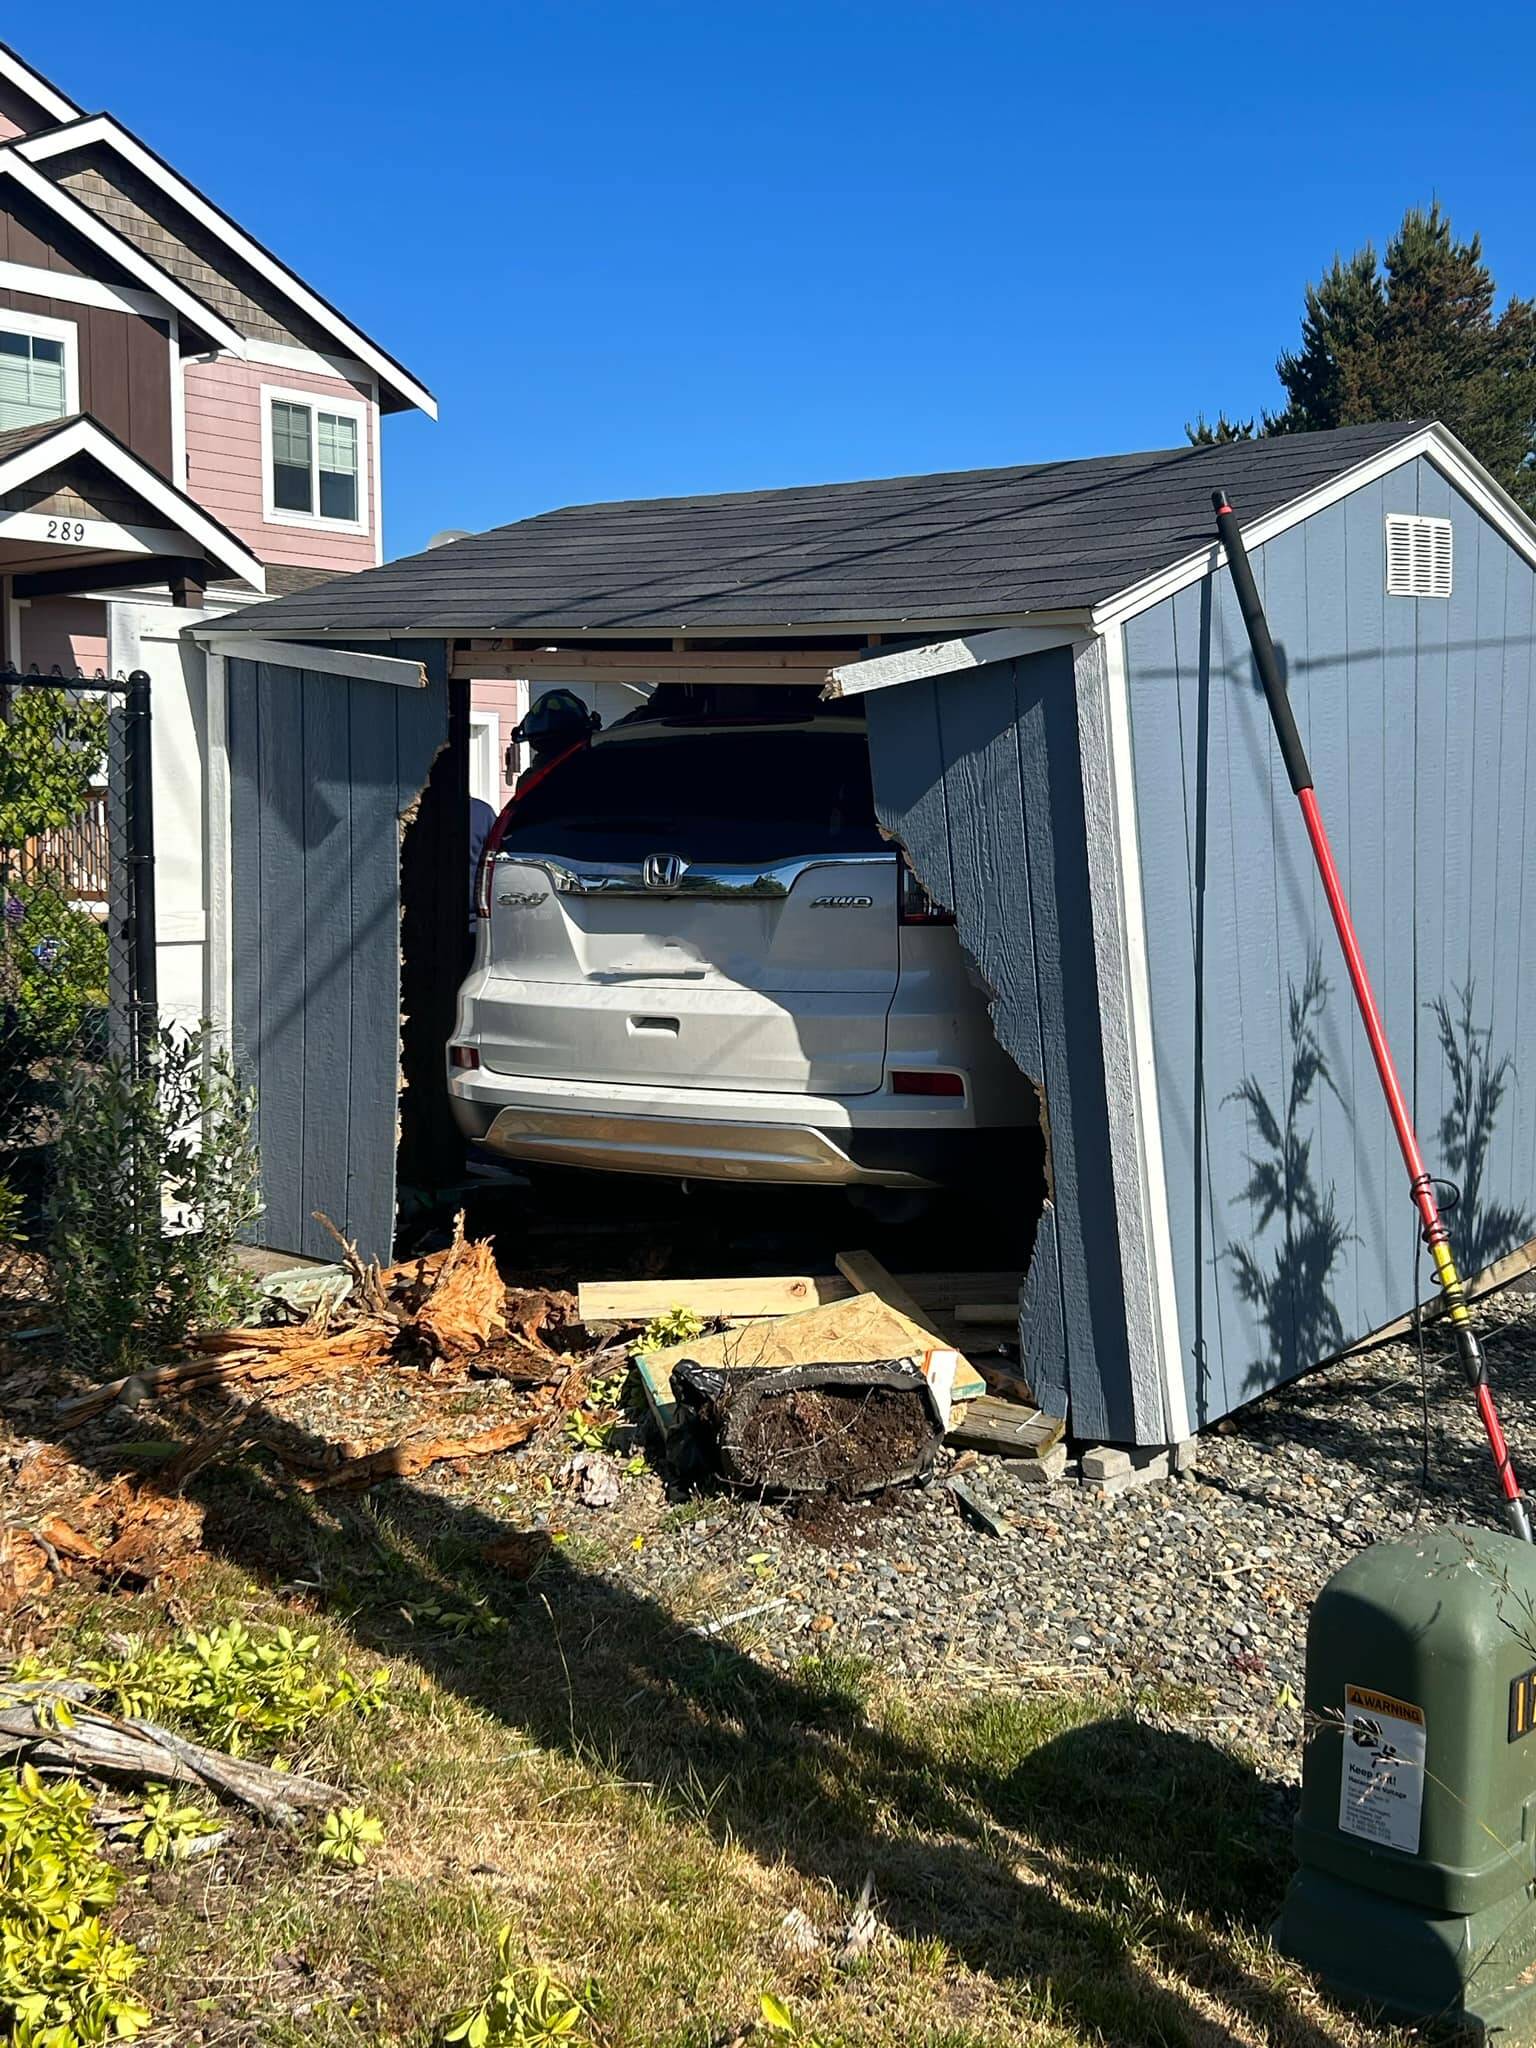 A visitor to Ocean Shores drove through a shed Monday morning after losing consciousness. (Courtesy photo / Ocean Shores Fire Department)